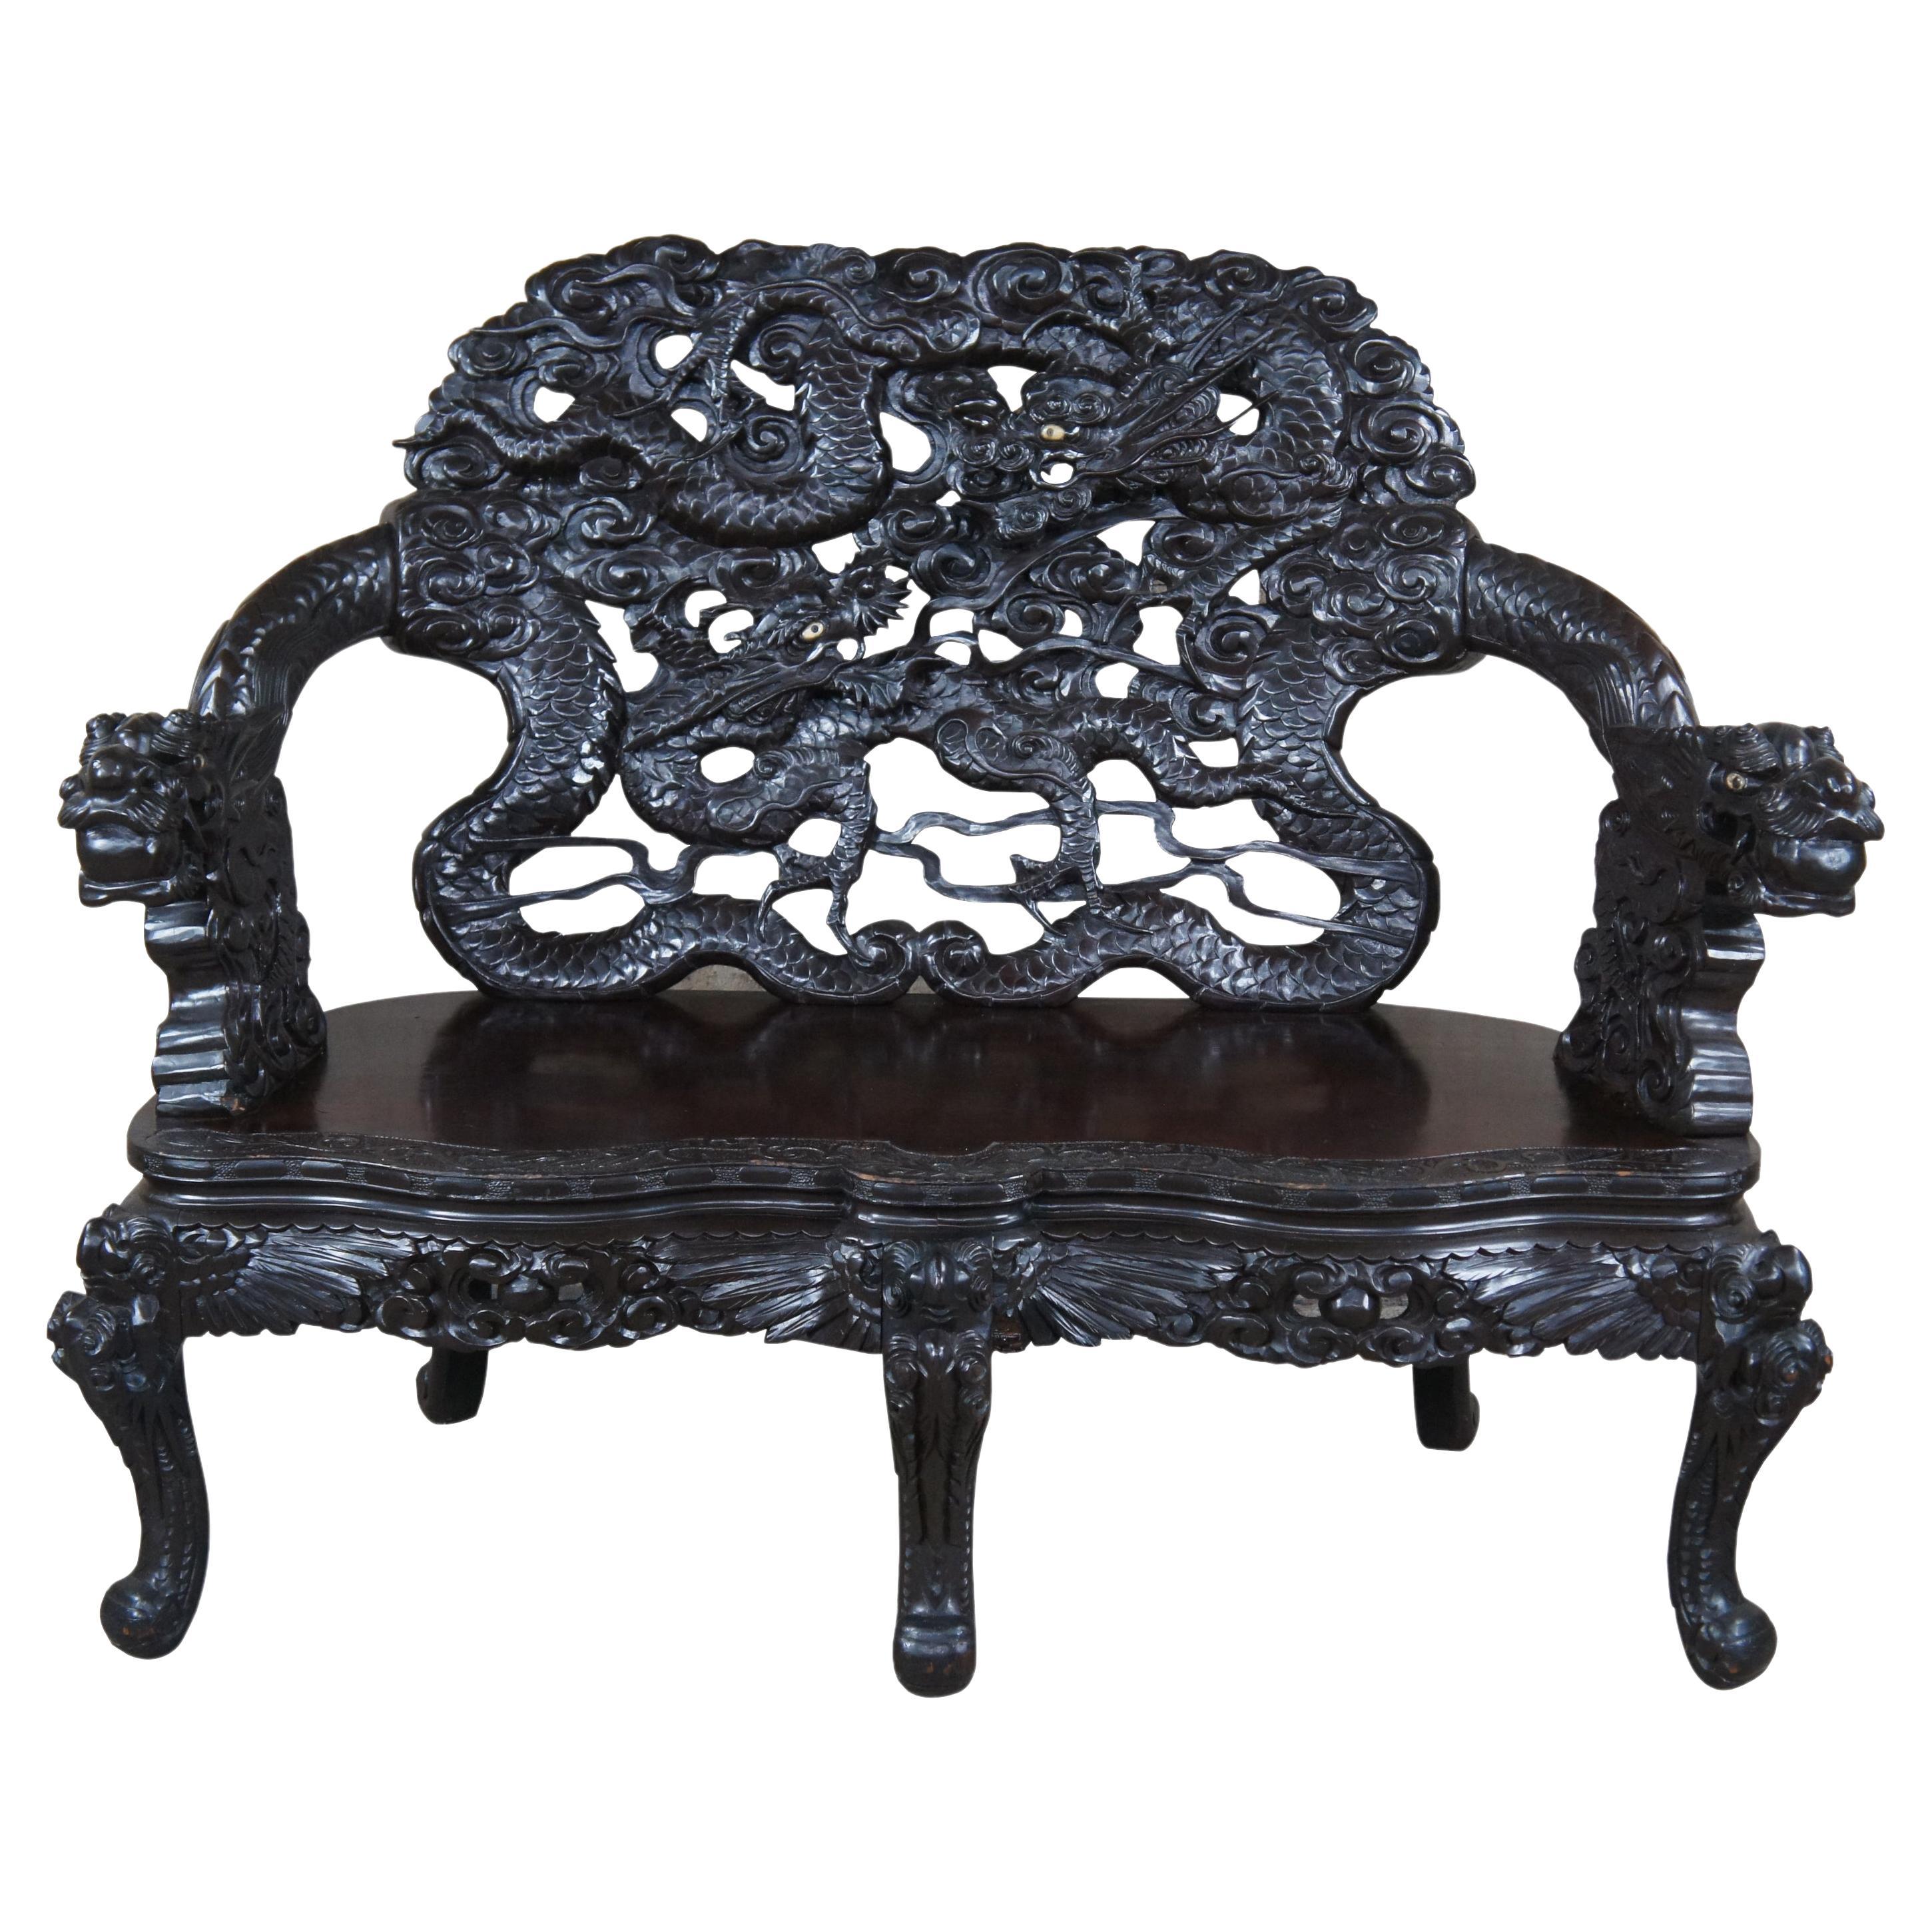 Antique Imperial Meiji Japanese Ebonized High Relief Carved Dragon Bench For Sale